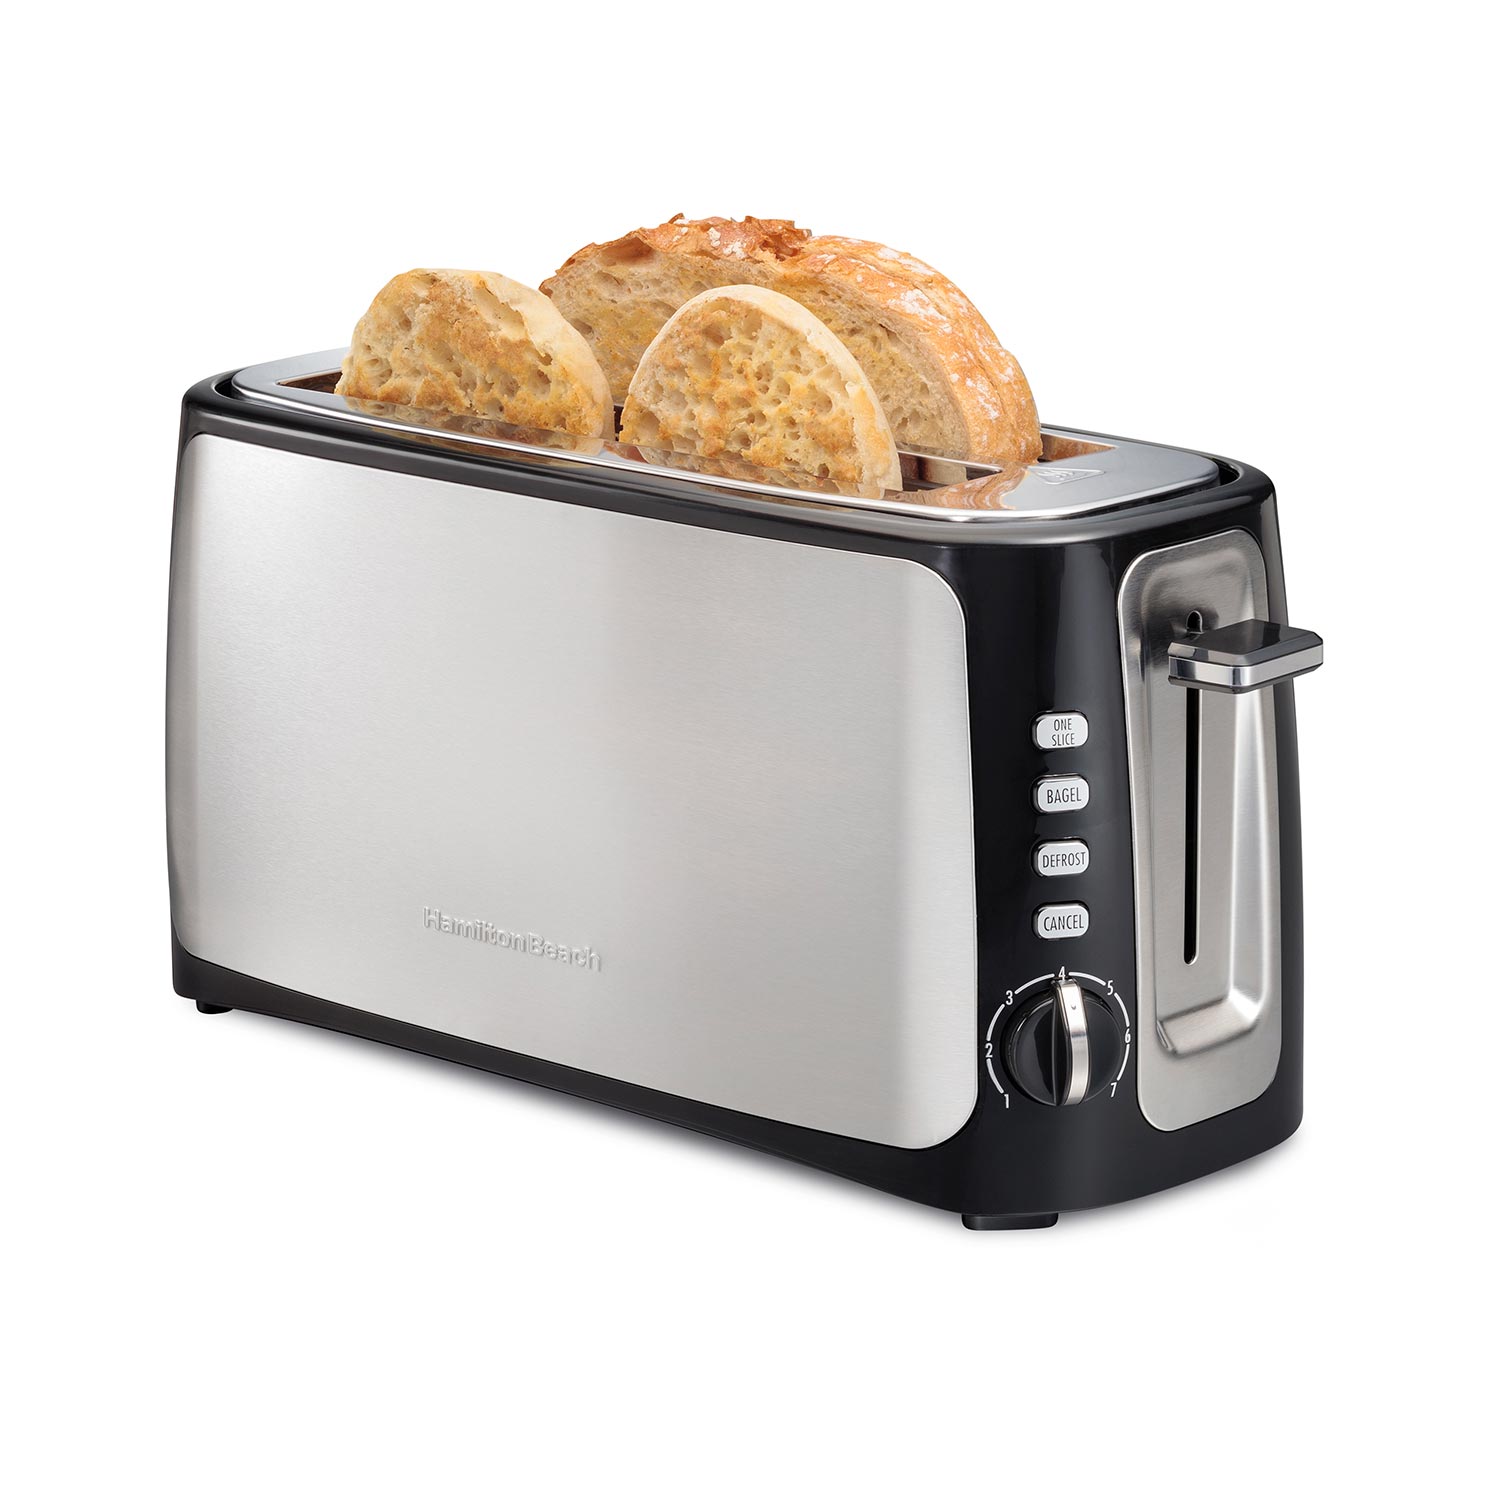 4 Slice Long-Slot Toaster with Sure-Toast One-Slice Technology (24820)